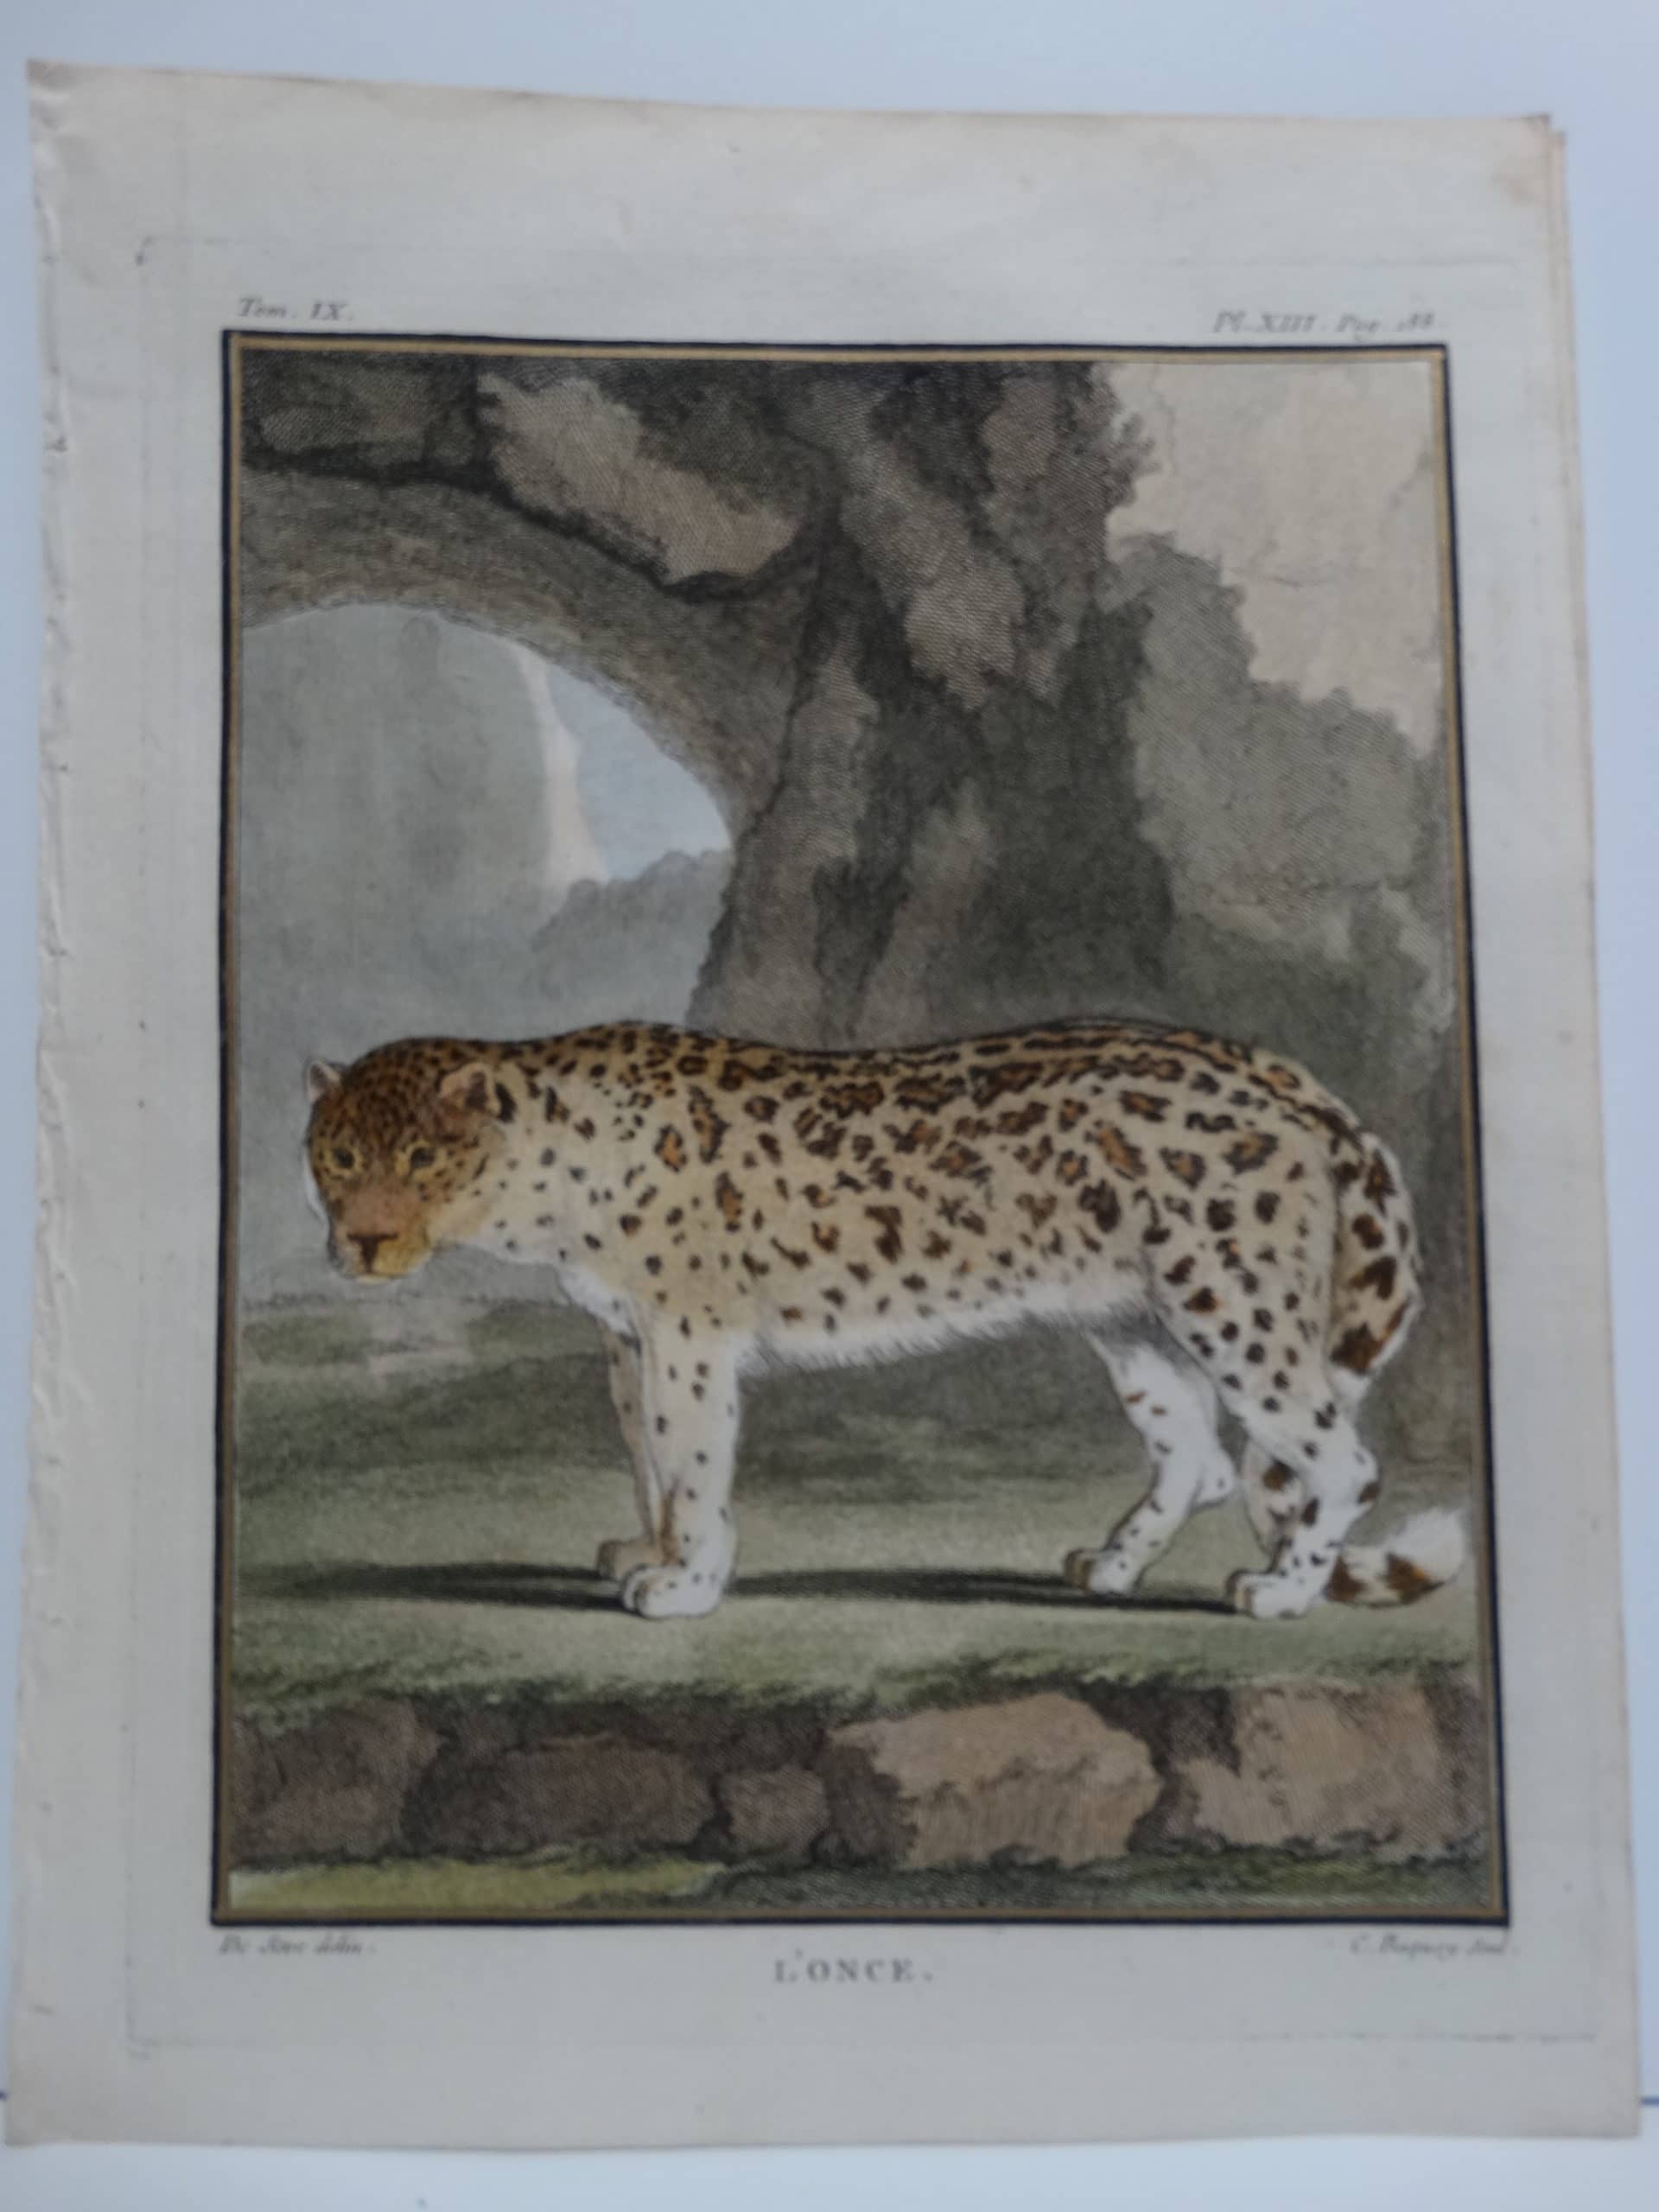 Exotic species of cat, the once has a spotted coat. An antique engraving with watercoloring.